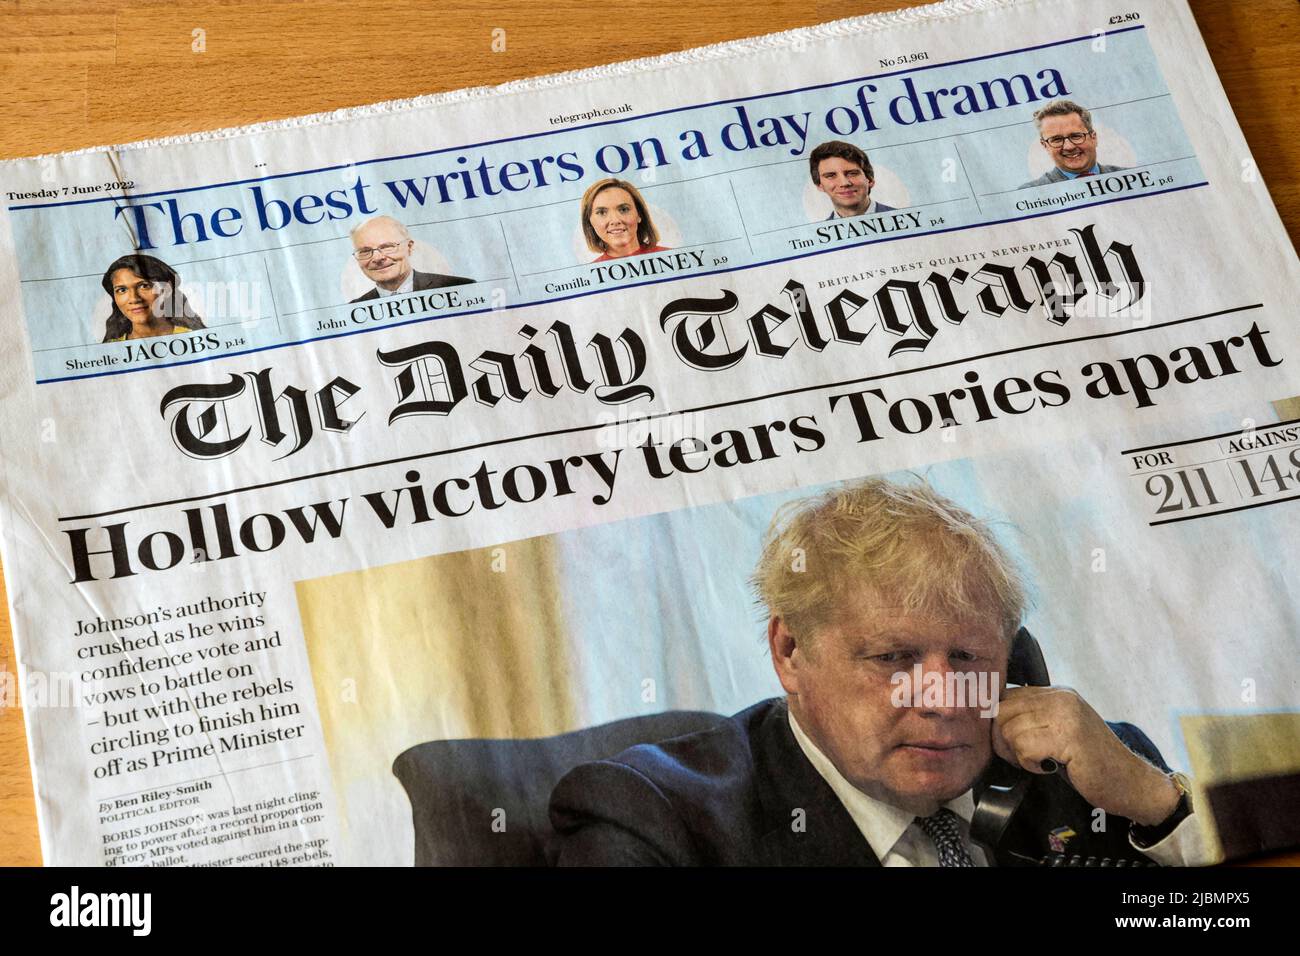 7 June 2022. The Daily Telegraph newspaper headline reads Hollow victory tears Tories apart, after Boris Johnson survives a vote of no confidence. Stock Photo